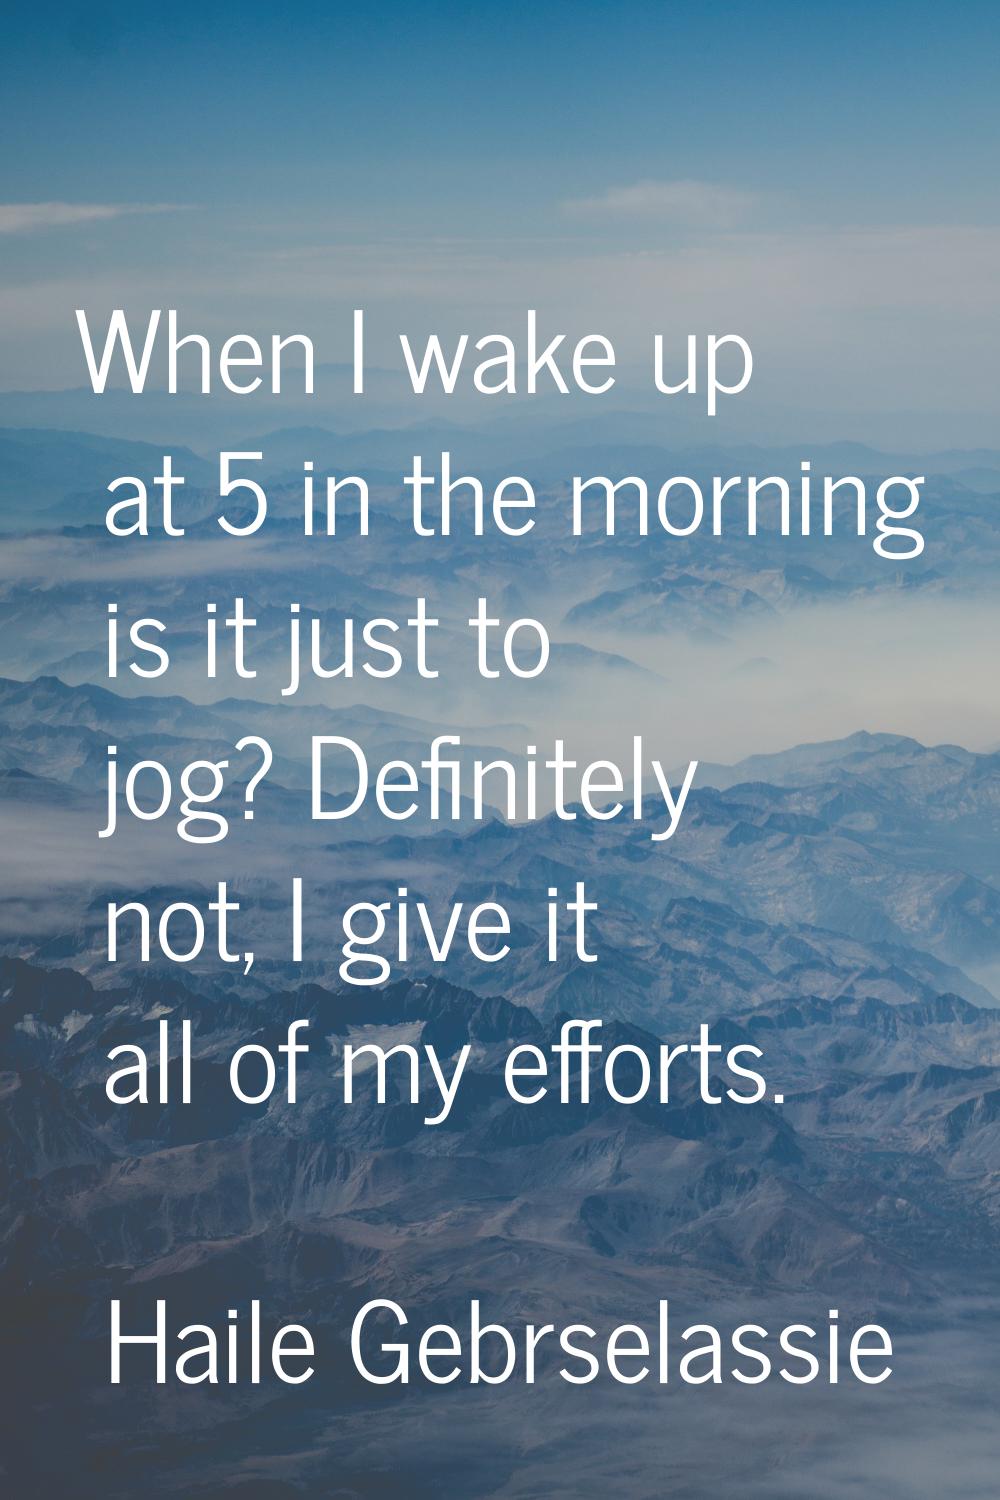 When I wake up at 5 in the morning is it just to jog? Definitely not, I give it all of my efforts.